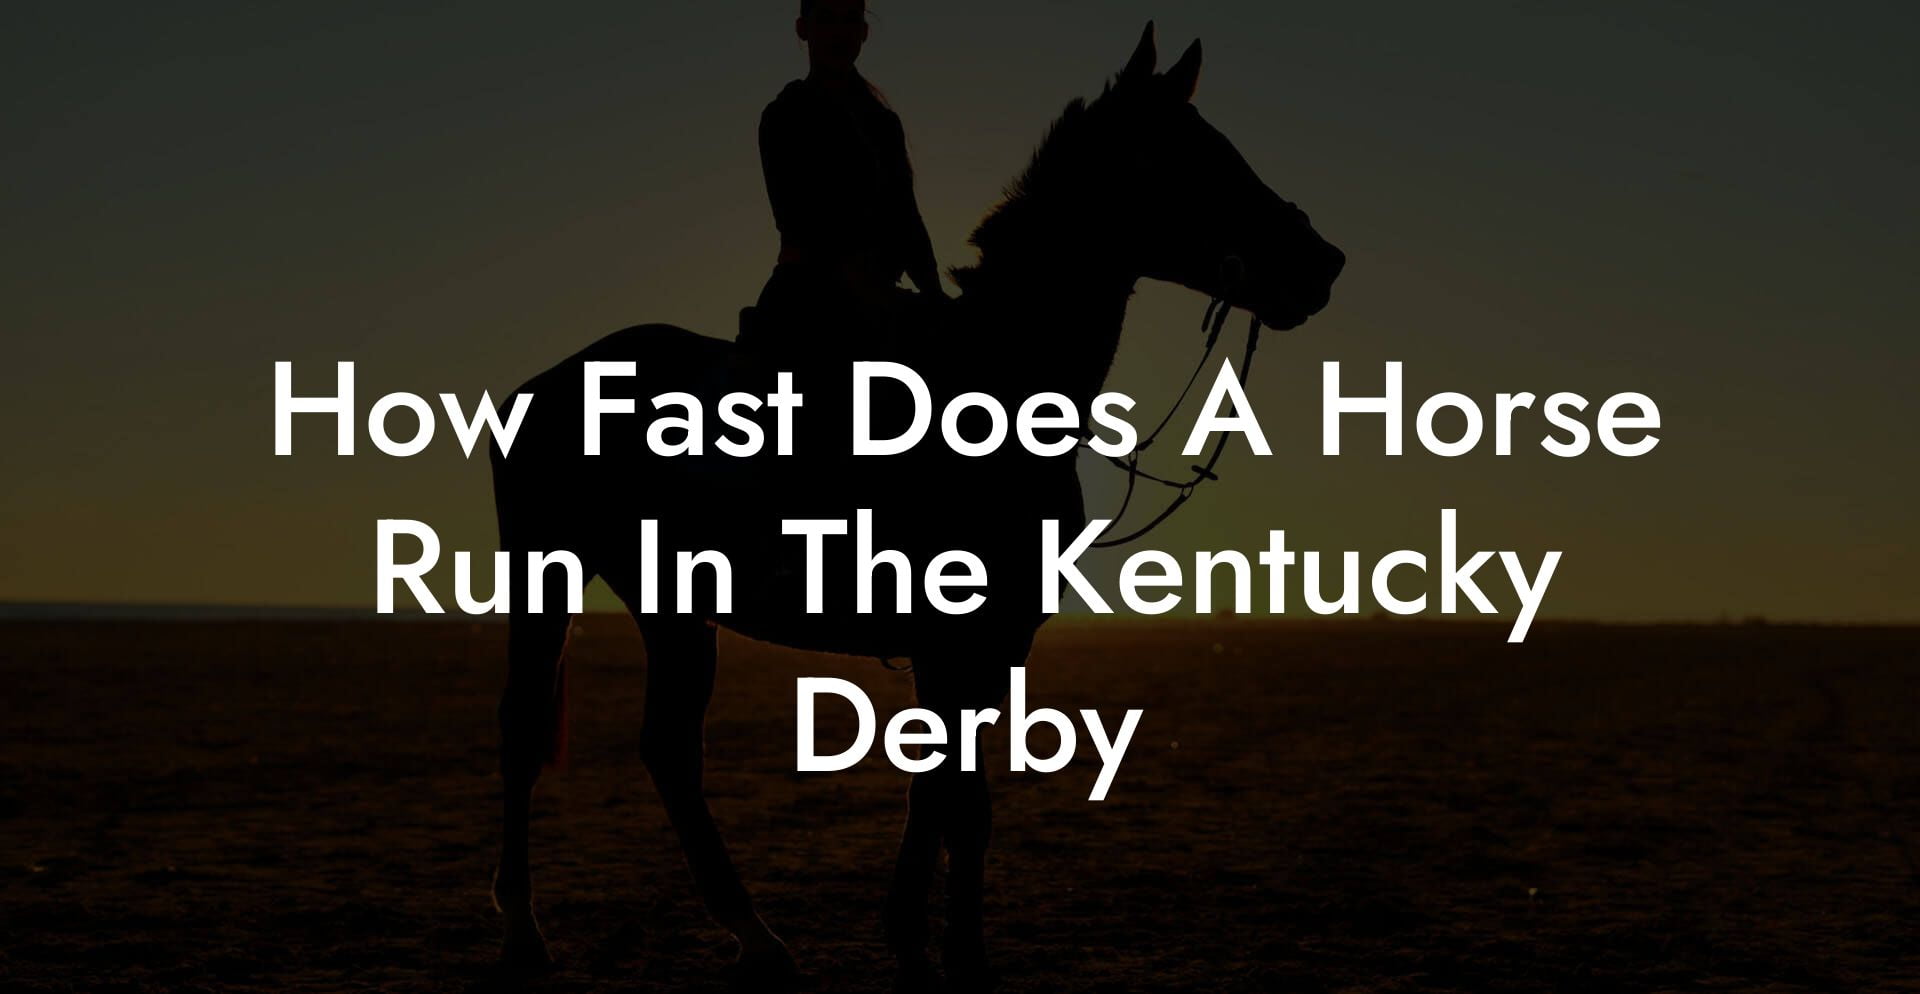 How Fast Does A Horse Run In The Kentucky Derby